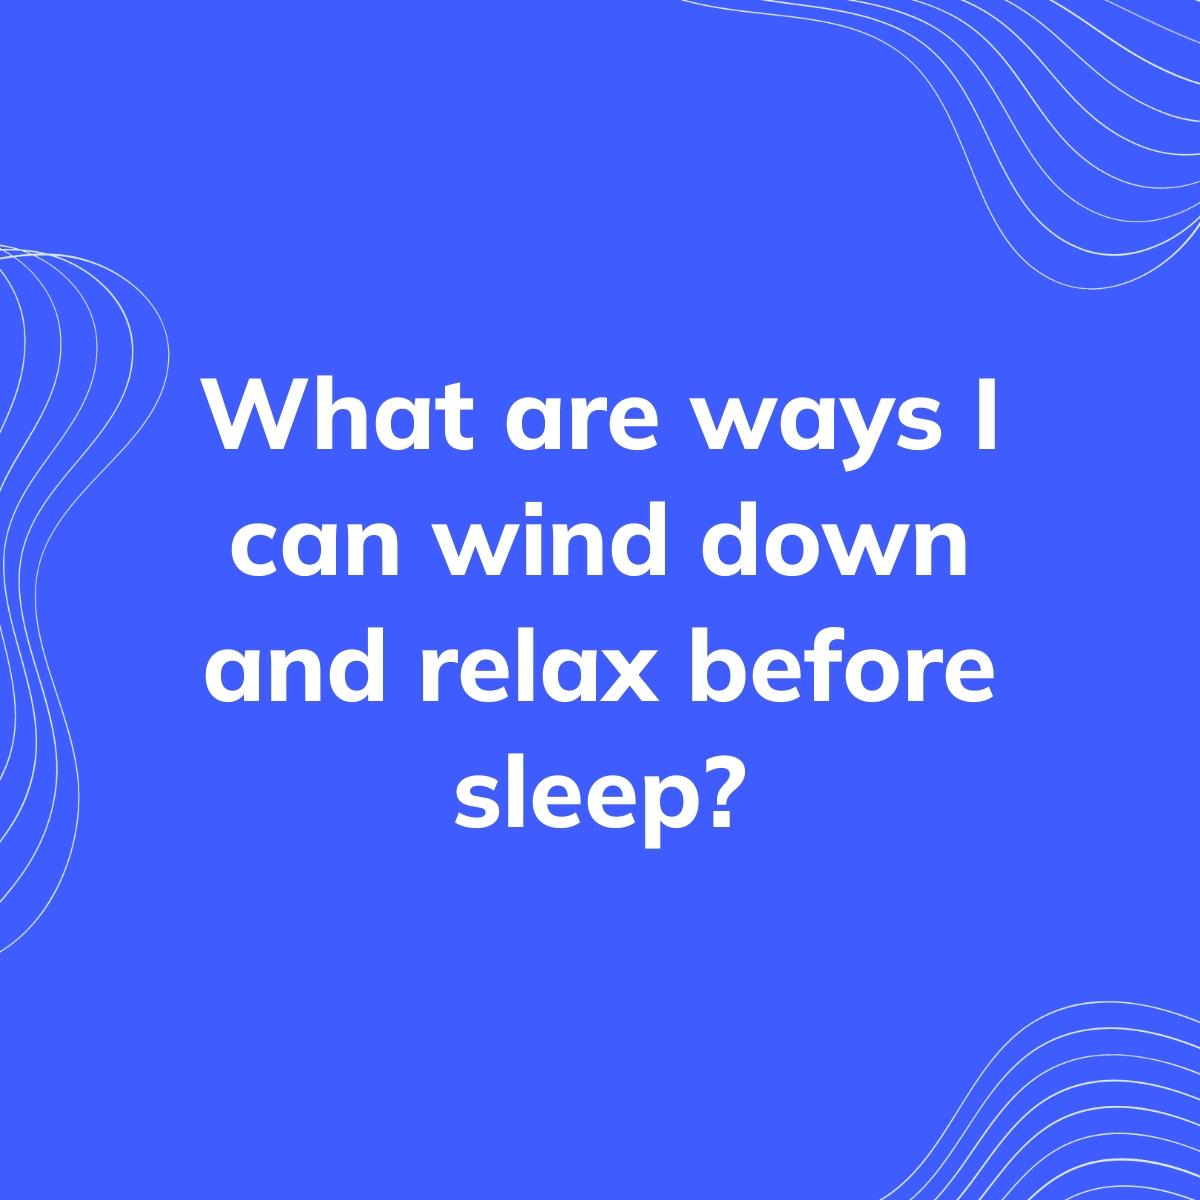 Journal Prompt: What are ways I can wind down and relax before sleep?